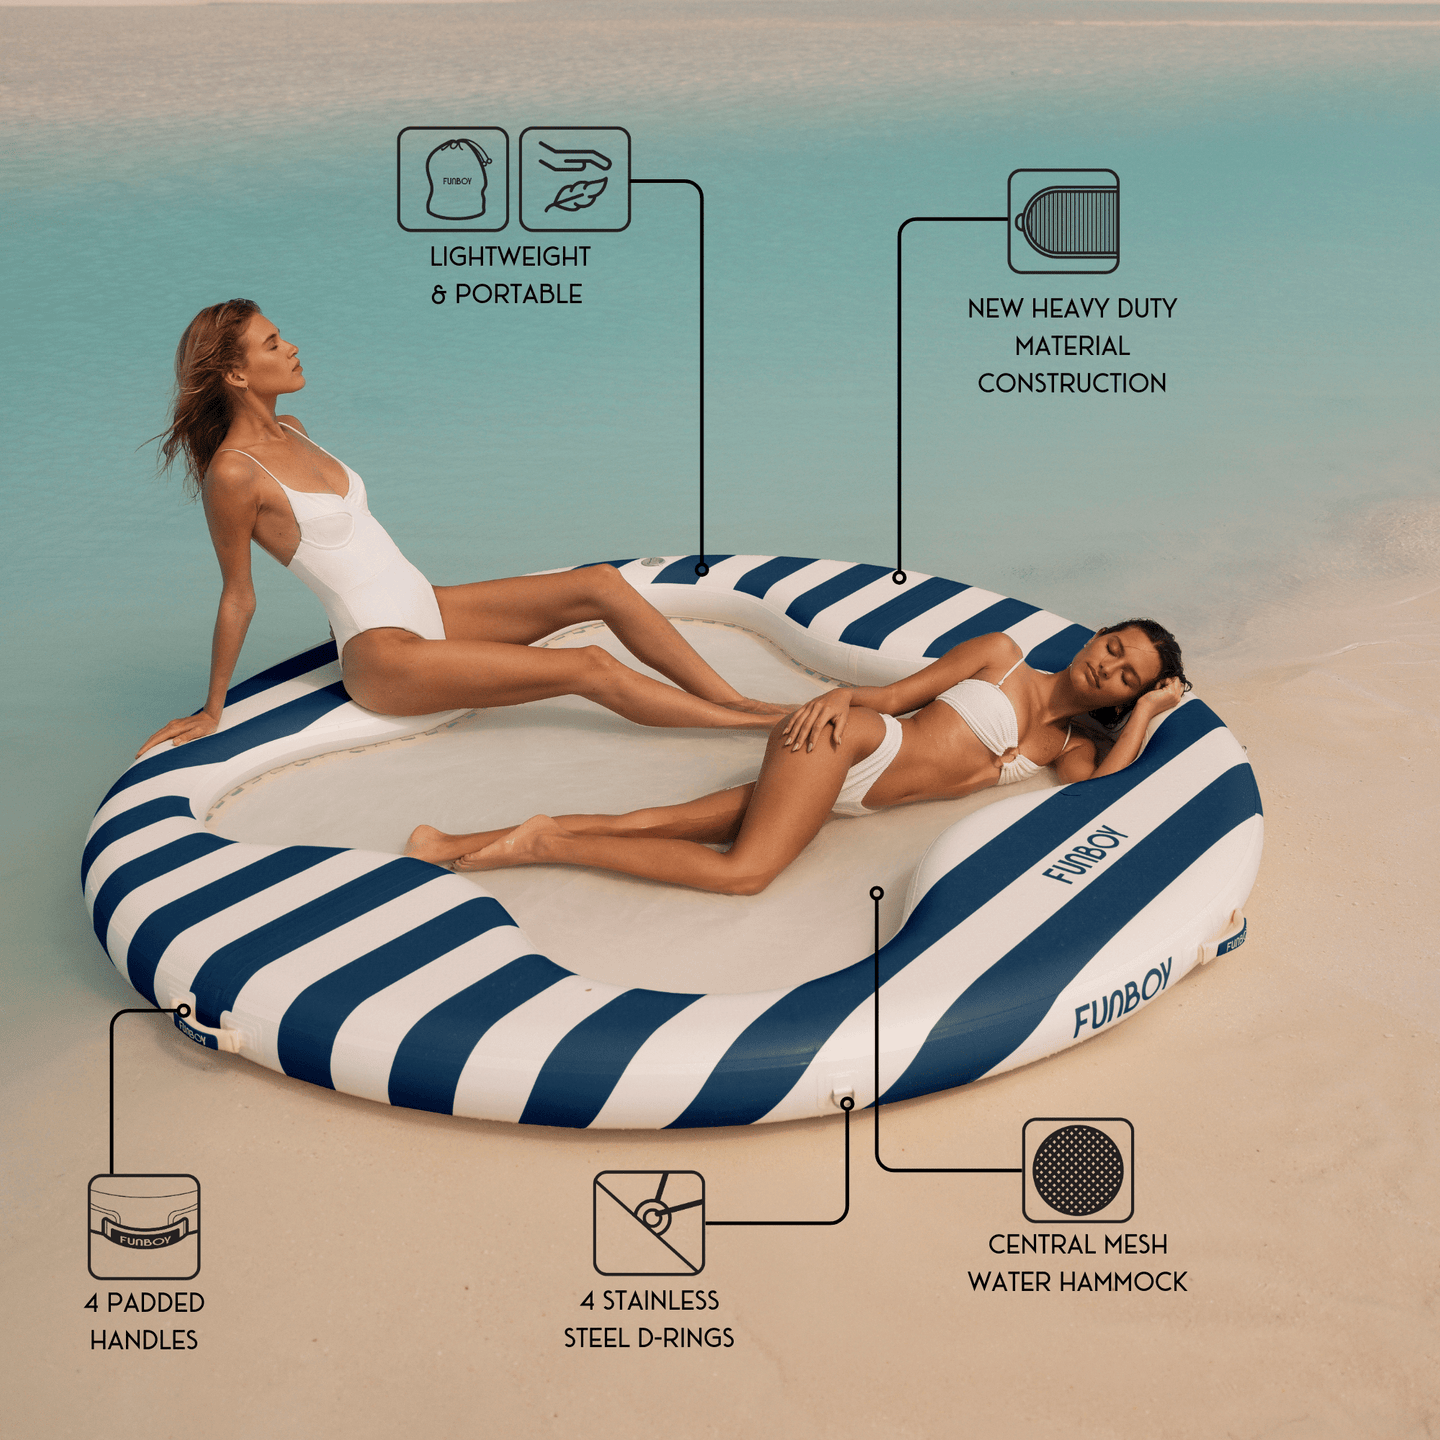 Inflatable Swim Platform - lightweight and portable. New Heavy Duty material construction. 4 padded handles. 4 stainless steel d-rings. Central mesh water hammock. 